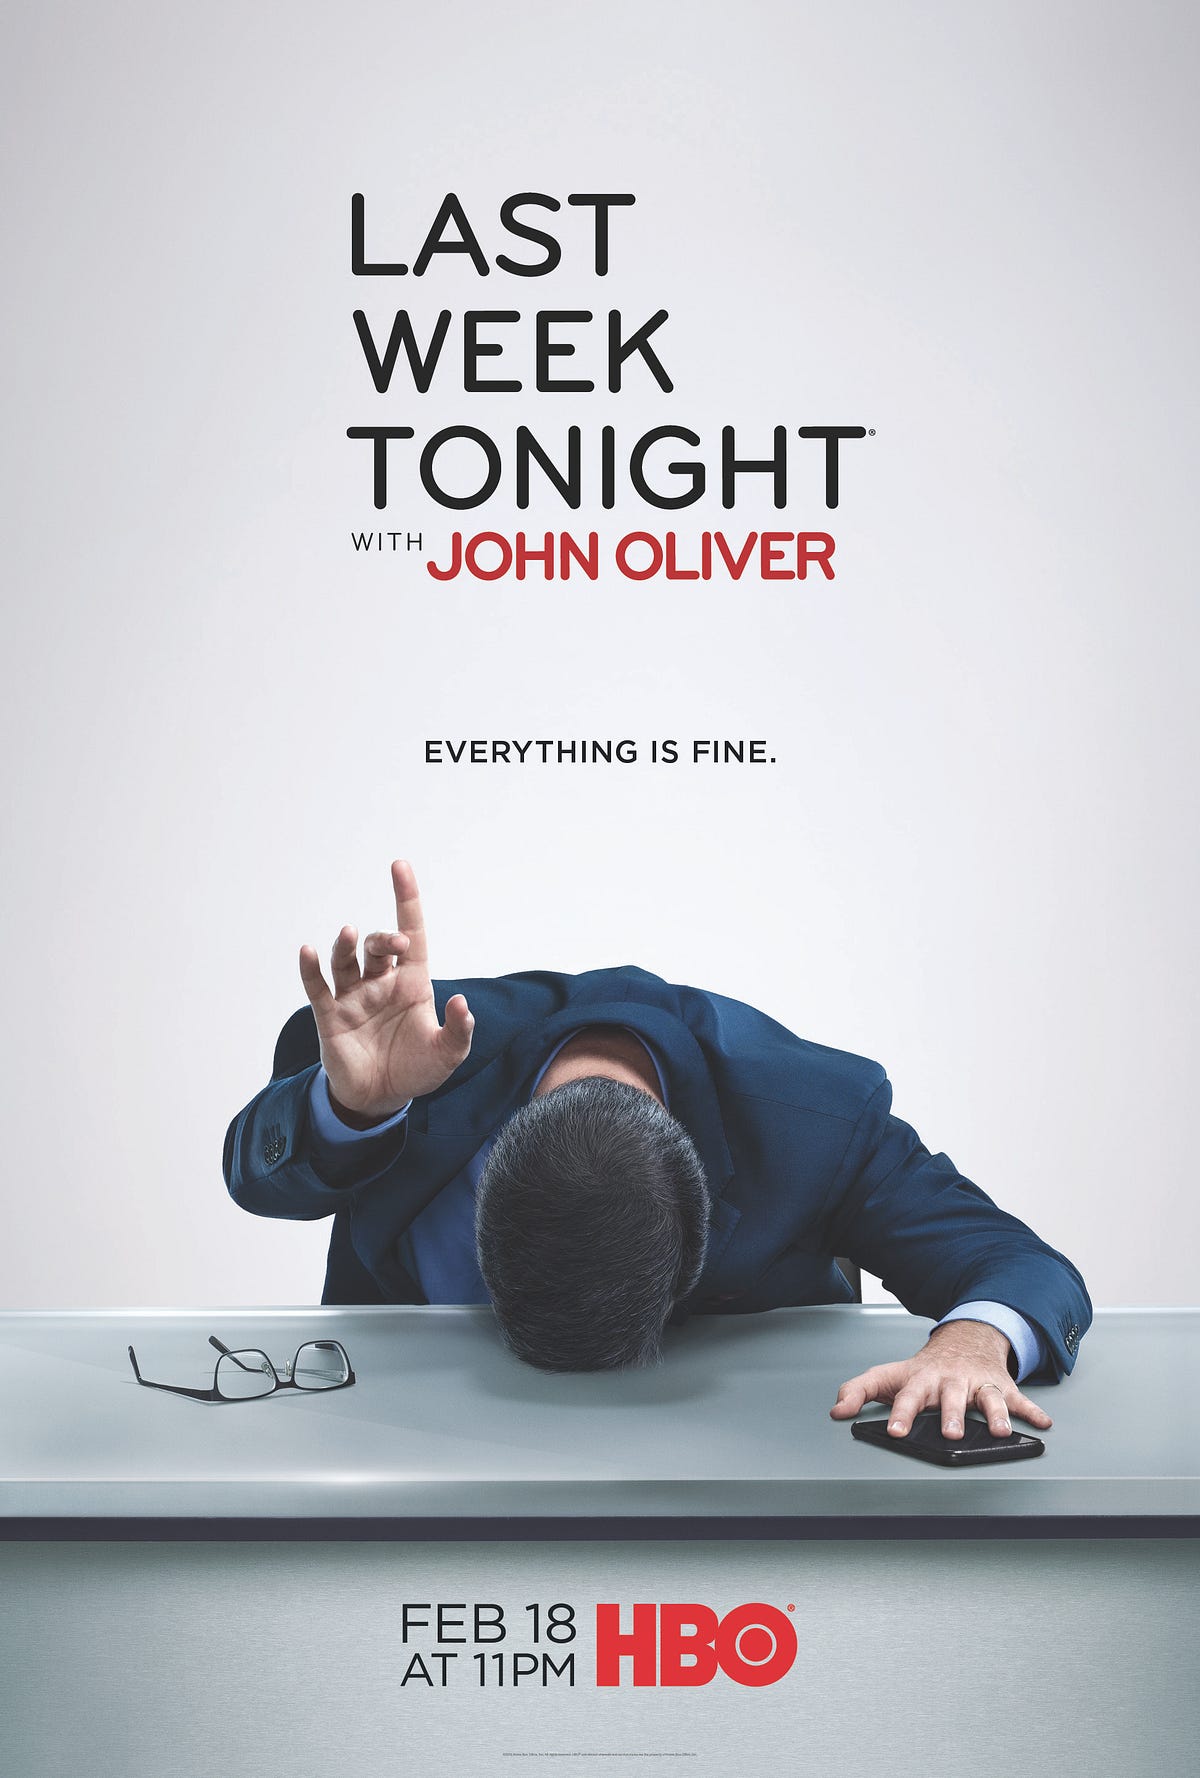 LAST WEEK TONIGHT WITH JOHN OLIVER RETURNS FOR ITS FIFTH SEASON FEB. 18